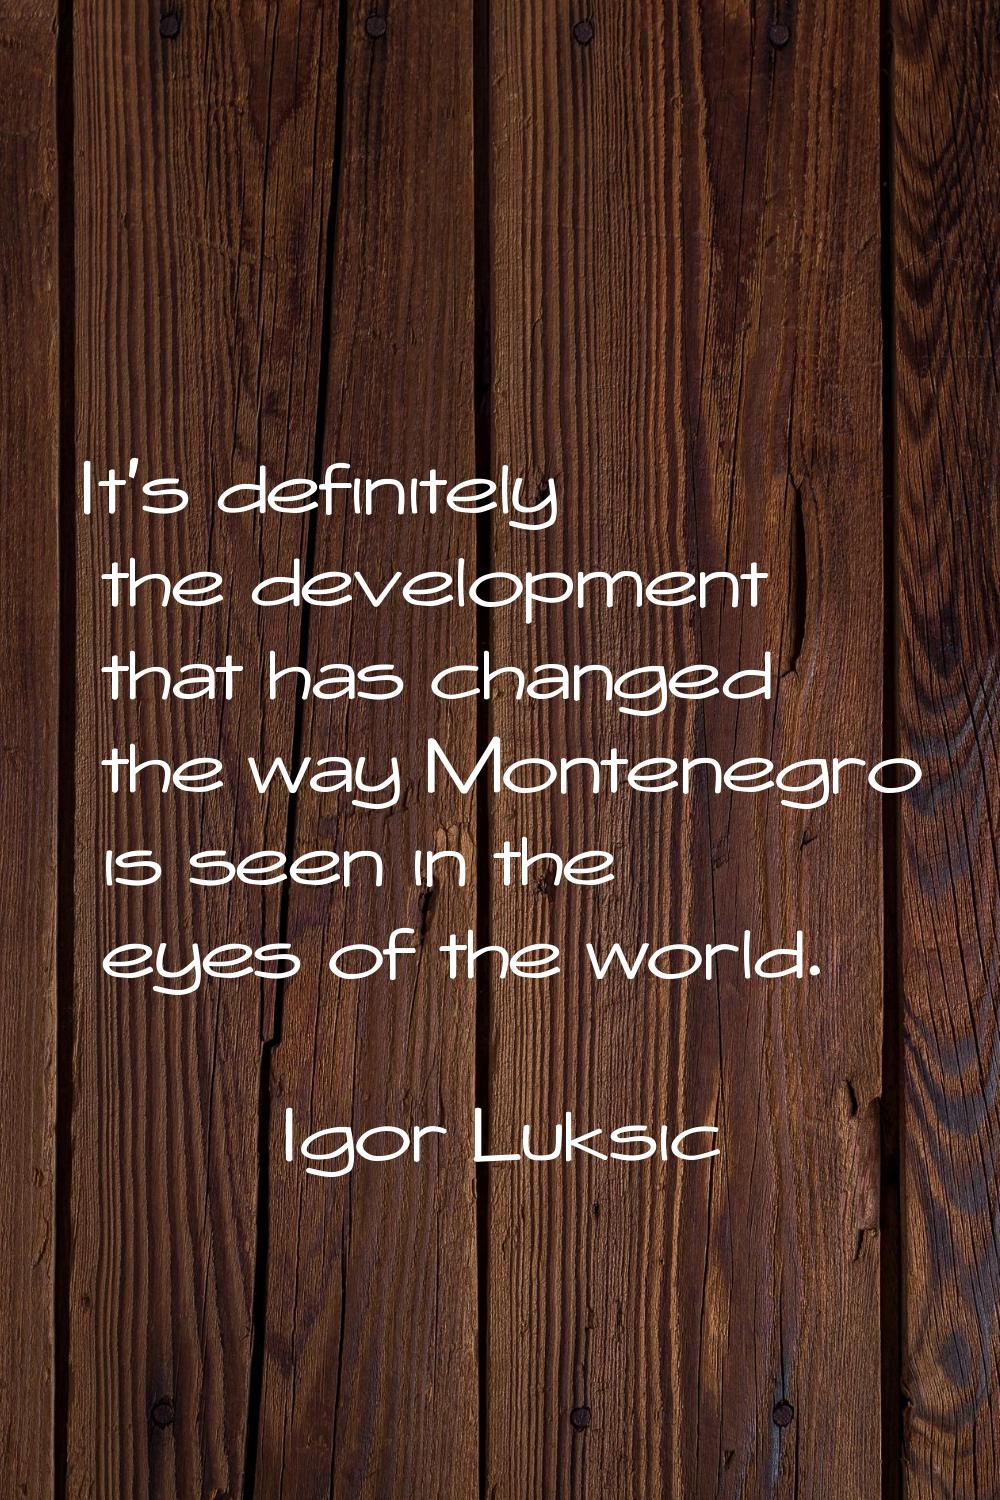 It's definitely the development that has changed the way Montenegro is seen in the eyes of the worl